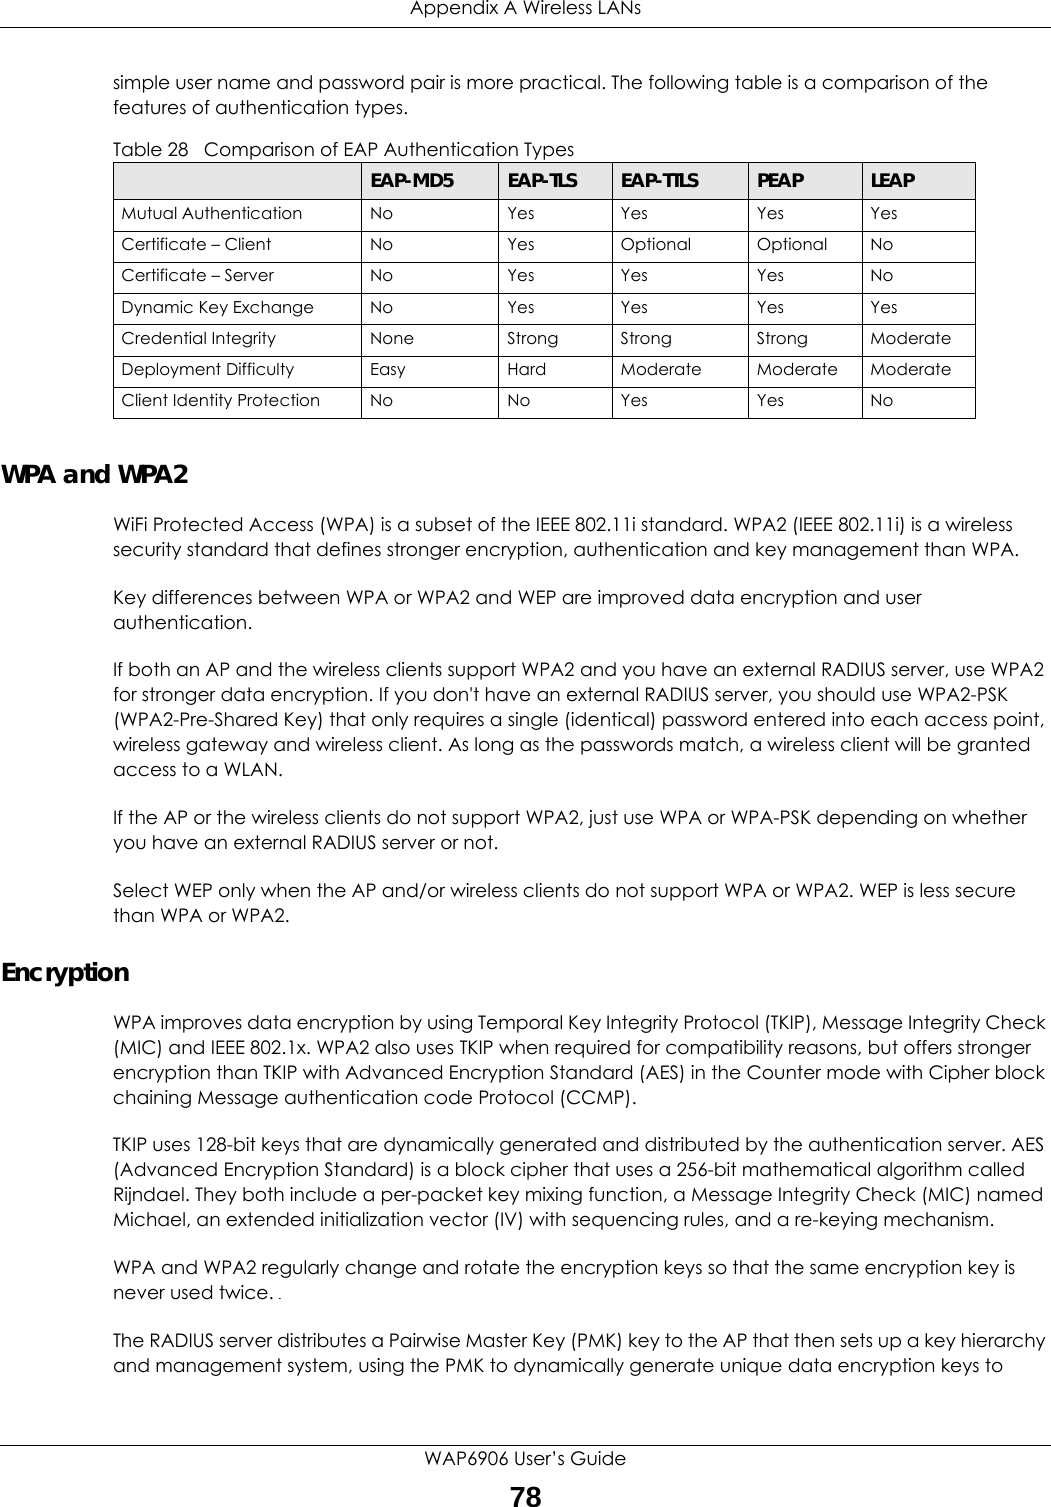 Appendix A Wireless LANsWAP6906 User’s Guide78simple user name and password pair is more practical. The following table is a comparison of the features of authentication types.WPA and WPA2WiFi Protected Access (WPA) is a subset of the IEEE 802.11i standard. WPA2 (IEEE 802.11i) is a wireless security standard that defines stronger encryption, authentication and key management than WPA. Key differences between WPA or WPA2 and WEP are improved data encryption and user authentication.If both an AP and the wireless clients support WPA2 and you have an external RADIUS server, use WPA2 for stronger data encryption. If you don&apos;t have an external RADIUS server, you should use WPA2-PSK (WPA2-Pre-Shared Key) that only requires a single (identical) password entered into each access point, wireless gateway and wireless client. As long as the passwords match, a wireless client will be granted access to a WLAN. If the AP or the wireless clients do not support WPA2, just use WPA or WPA-PSK depending on whether you have an external RADIUS server or not.Select WEP only when the AP and/or wireless clients do not support WPA or WPA2. WEP is less secure than WPA or WPA2.Encryption WPA improves data encryption by using Temporal Key Integrity Protocol (TKIP), Message Integrity Check (MIC) and IEEE 802.1x. WPA2 also uses TKIP when required for compatibility reasons, but offers stronger encryption than TKIP with Advanced Encryption Standard (AES) in the Counter mode with Cipher block chaining Message authentication code Protocol (CCMP).TKIP uses 128-bit keys that are dynamically generated and distributed by the authentication server. AES (Advanced Encryption Standard) is a block cipher that uses a 256-bit mathematical algorithm called Rijndael. They both include a per-packet key mixing function, a Message Integrity Check (MIC) named Michael, an extended initialization vector (IV) with sequencing rules, and a re-keying mechanism.WPA and WPA2 regularly change and rotate the encryption keys so that the same encryption key is never used twice. The RADIUS server distributes a Pairwise Master Key (PMK) key to the AP that then sets up a key hierarchy and management system, using the PMK to dynamically generate unique data encryption keys to Table 28   Comparison of EAP Authentication TypesEAP-MD5 EAP-TLS EAP-TTLS PEAP LEAPMutual Authentication No Yes Yes Yes YesCertificate – Client No Yes Optional Optional NoCertificate – Server No Yes Yes Yes NoDynamic Key Exchange No Yes Yes Yes YesCredential Integrity None Strong Strong Strong ModerateDeployment Difficulty Easy Hard Moderate Moderate ModerateClient Identity Protection No No Yes Yes No